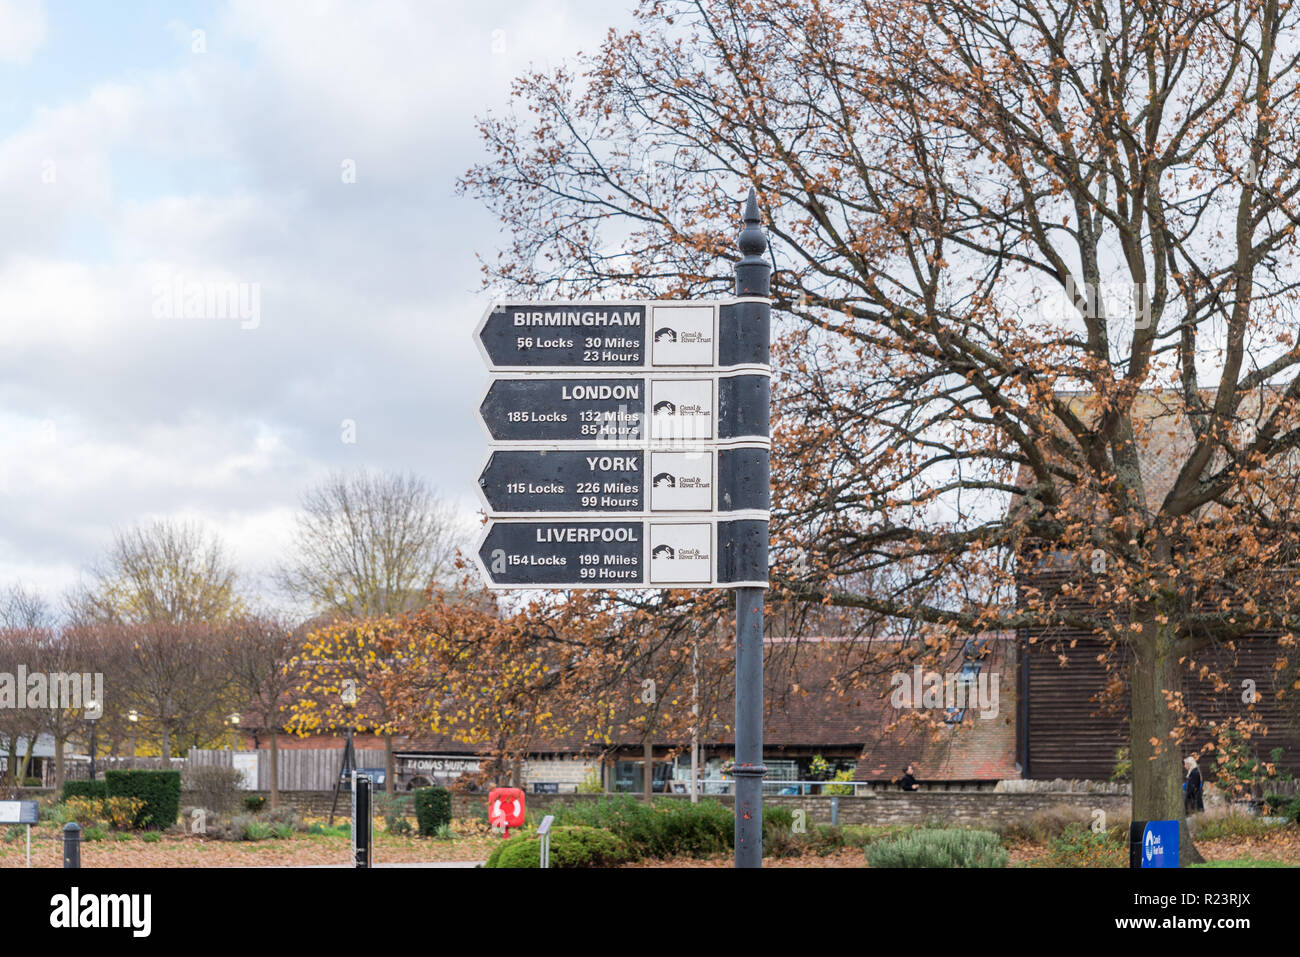 Canal and River Trust signs by the canal in Stratford-upon-Avon, Warwickshire showing distances to cities Birmingham,London,York and Liverpool Stock Photo